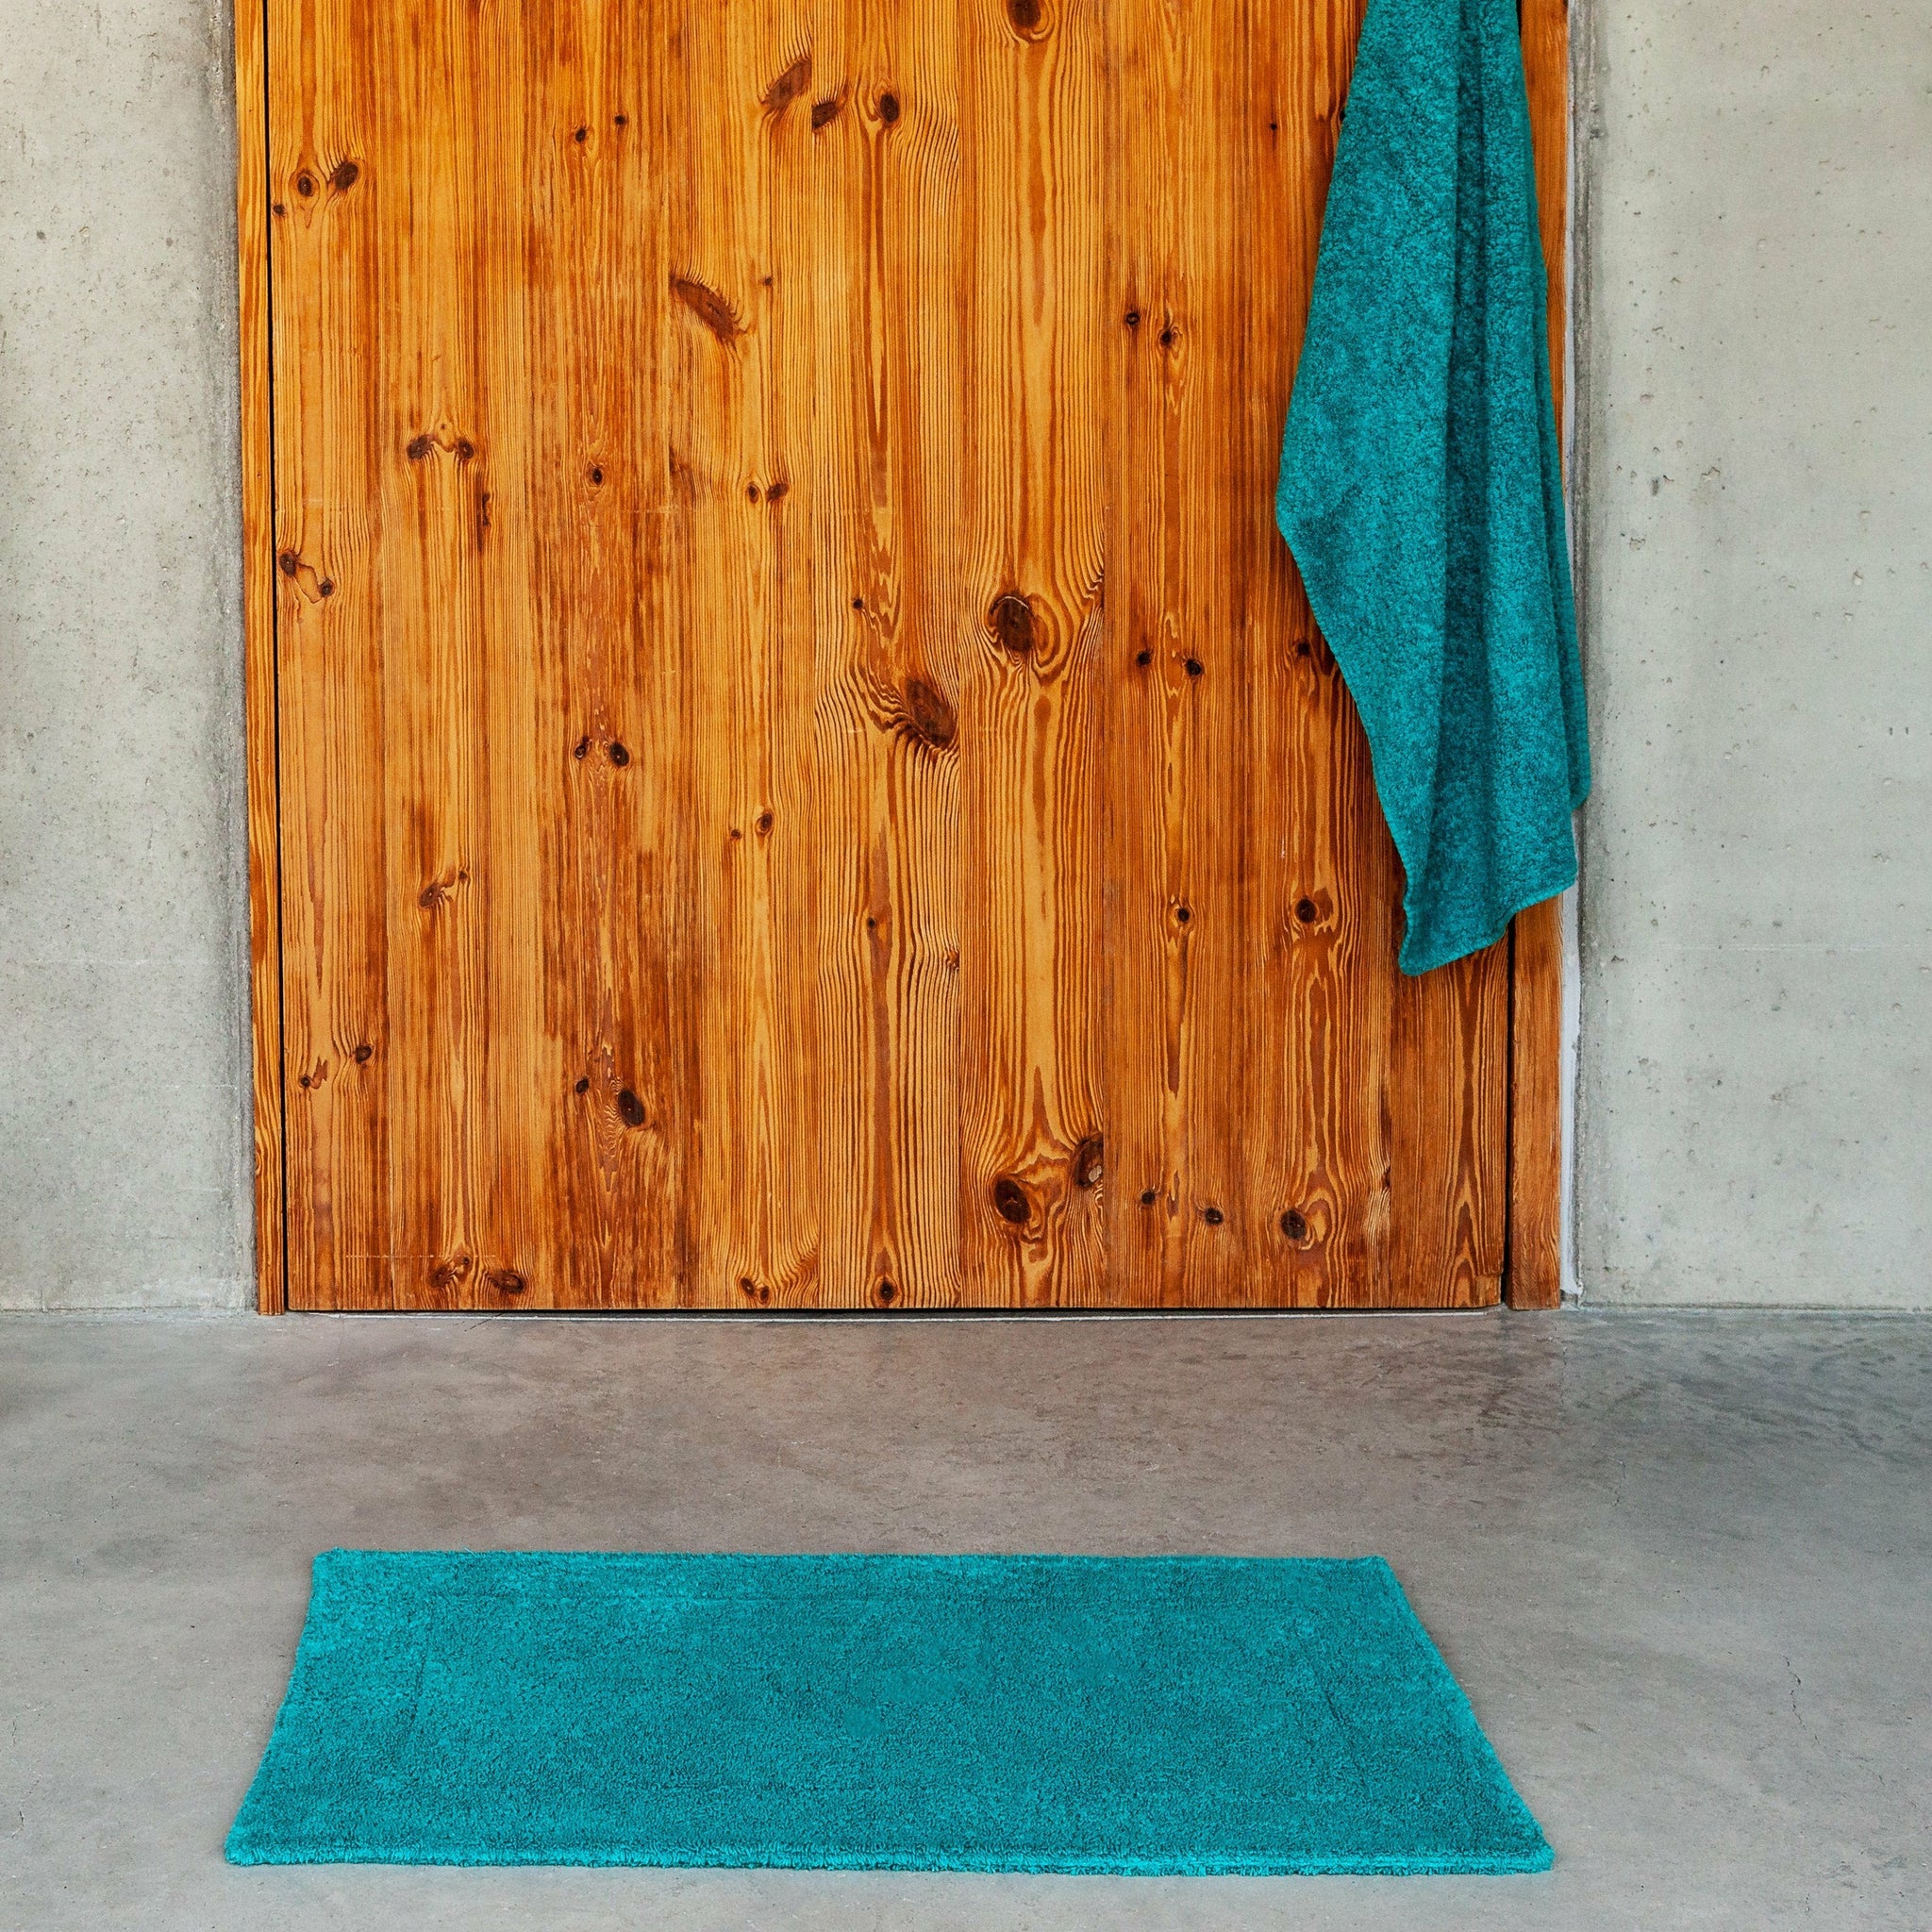 Abyss Super Pile towel and mat at available in 60 matching colors